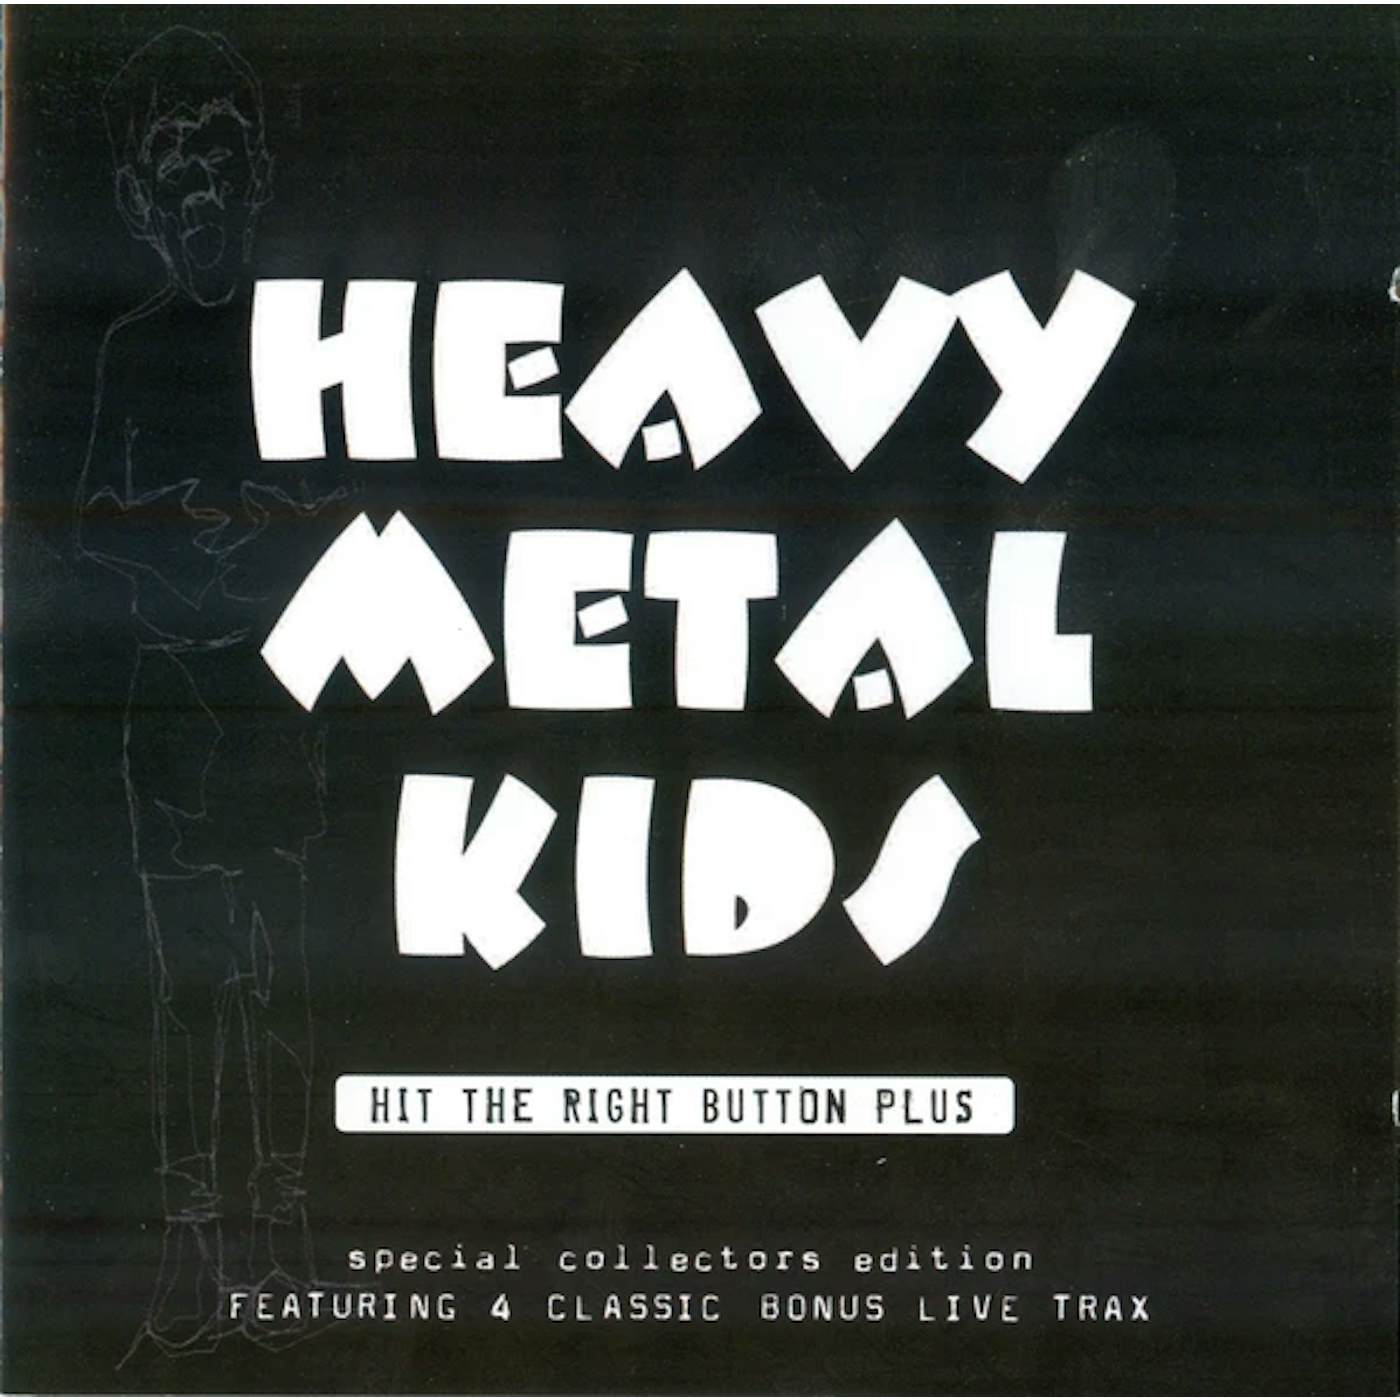 Heavy Metal Kids HIT THE RIGHT BUTTON PLUS CD